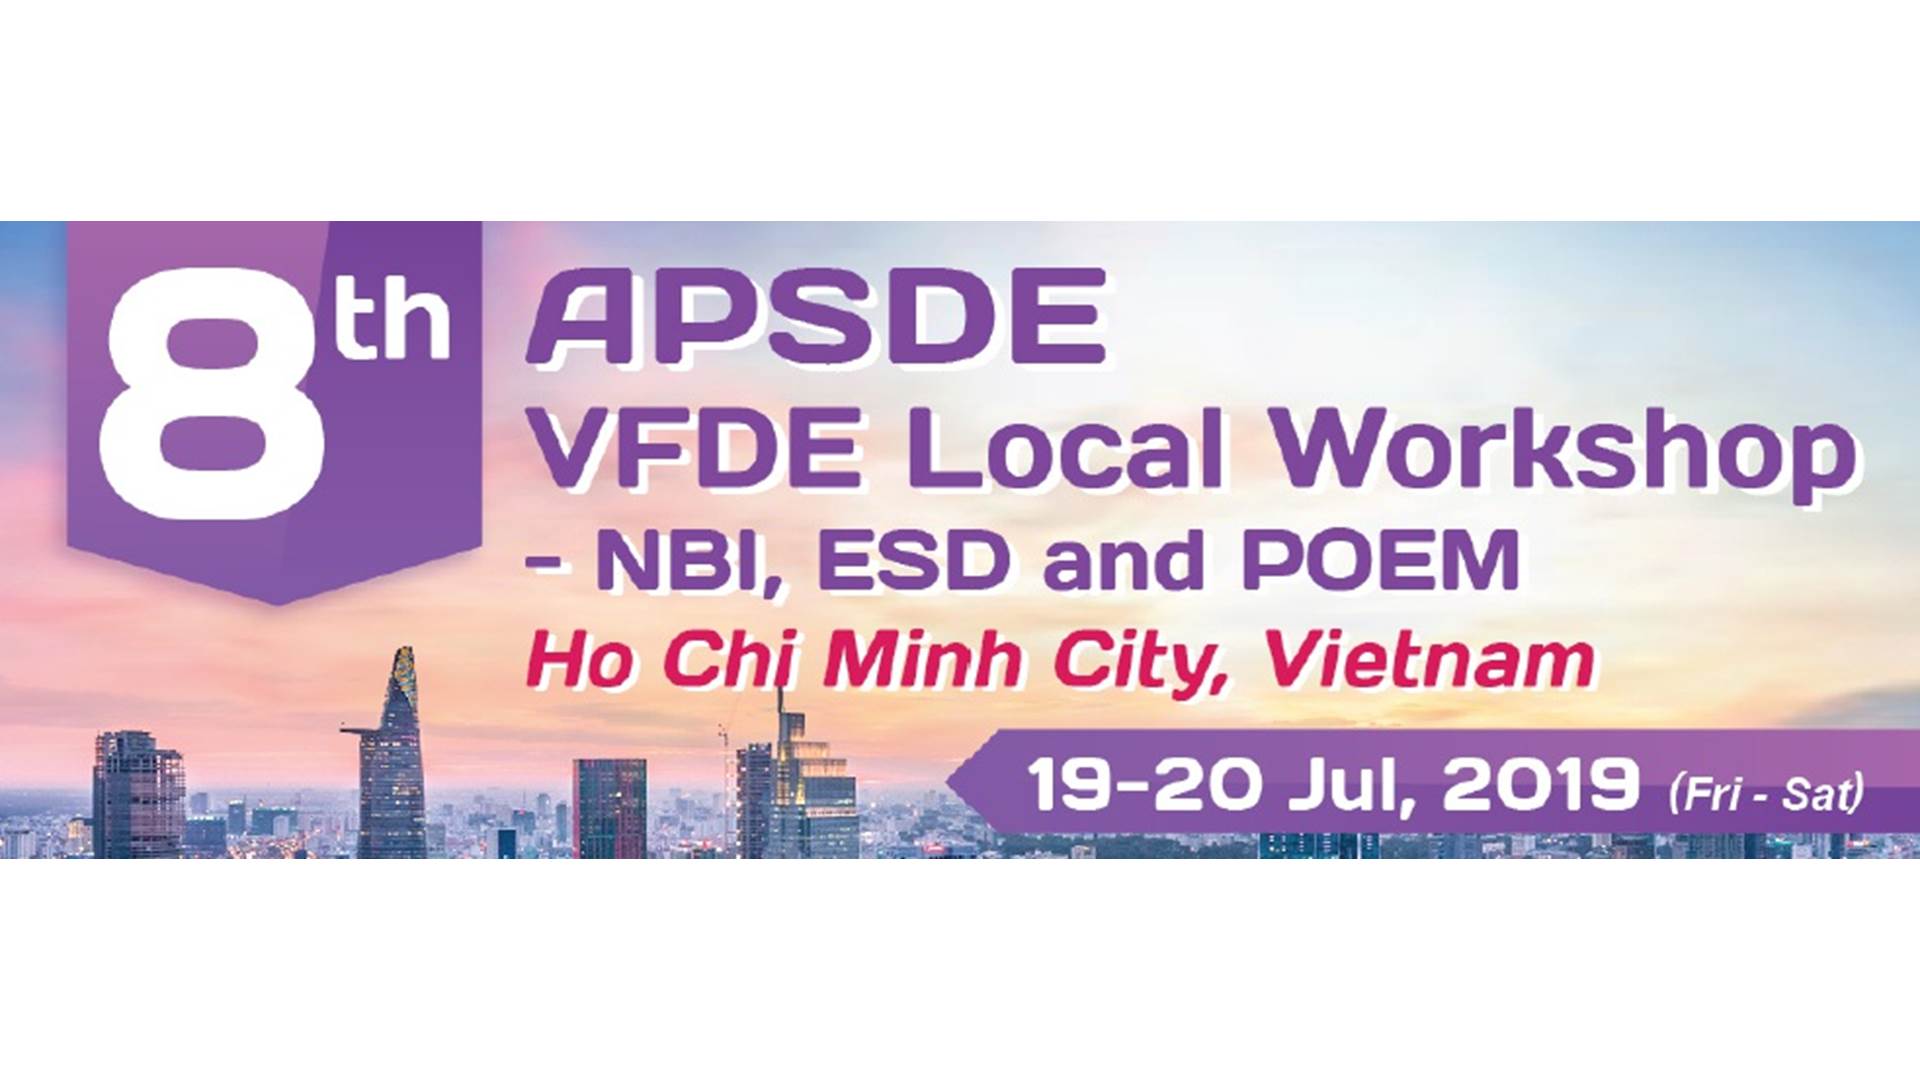 The 8th APSDE VFDE Local Workshop – NBI, ESD and POEM